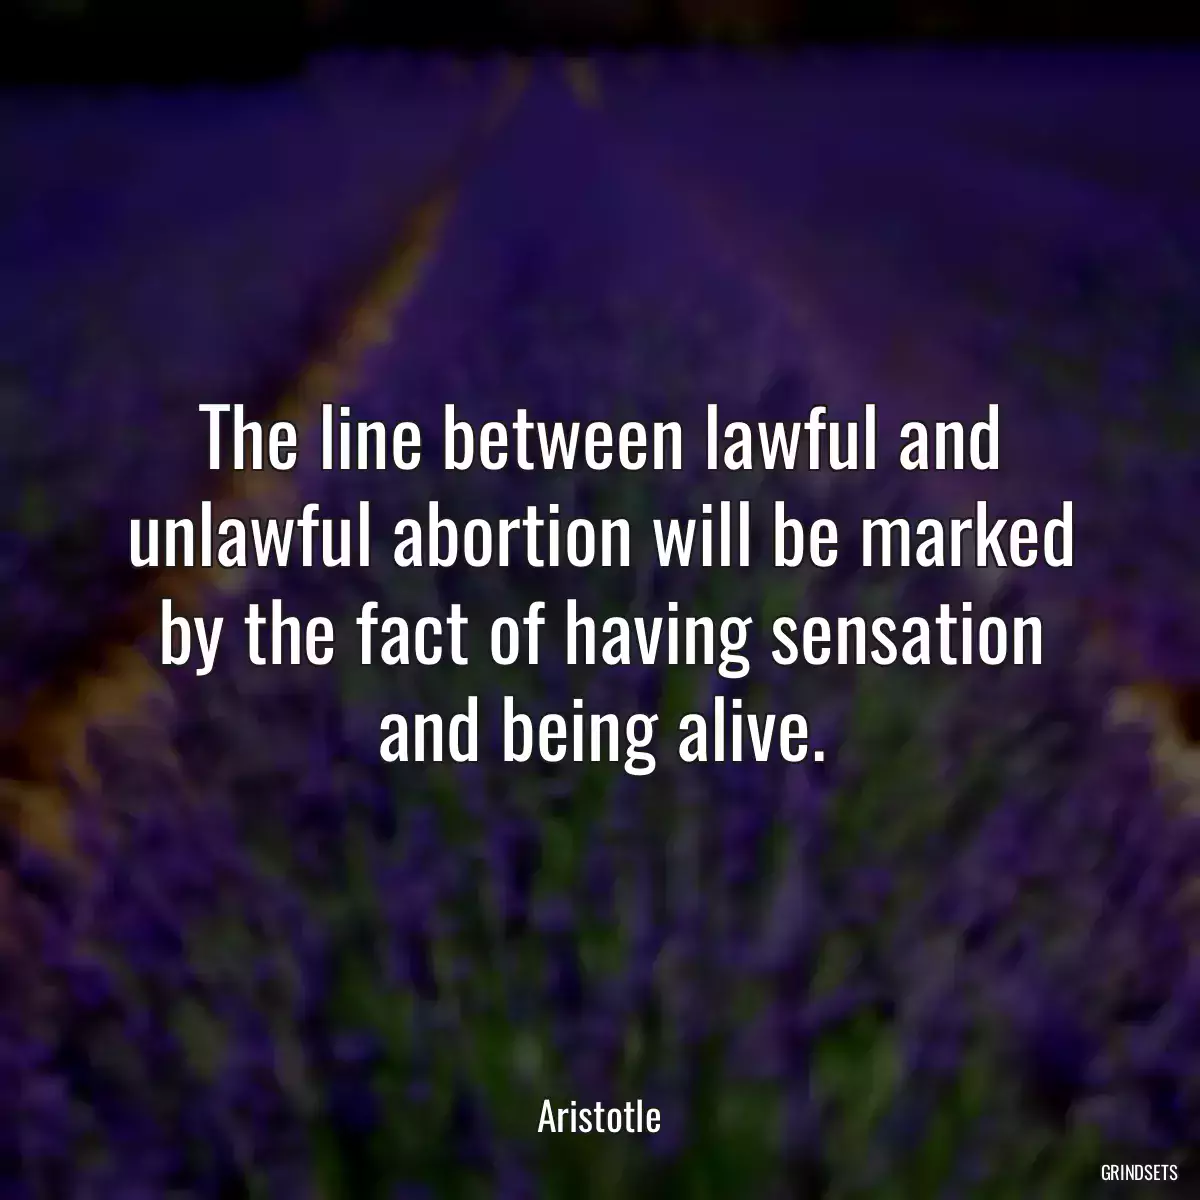 The line between lawful and unlawful abortion will be marked by the fact of having sensation and being alive.